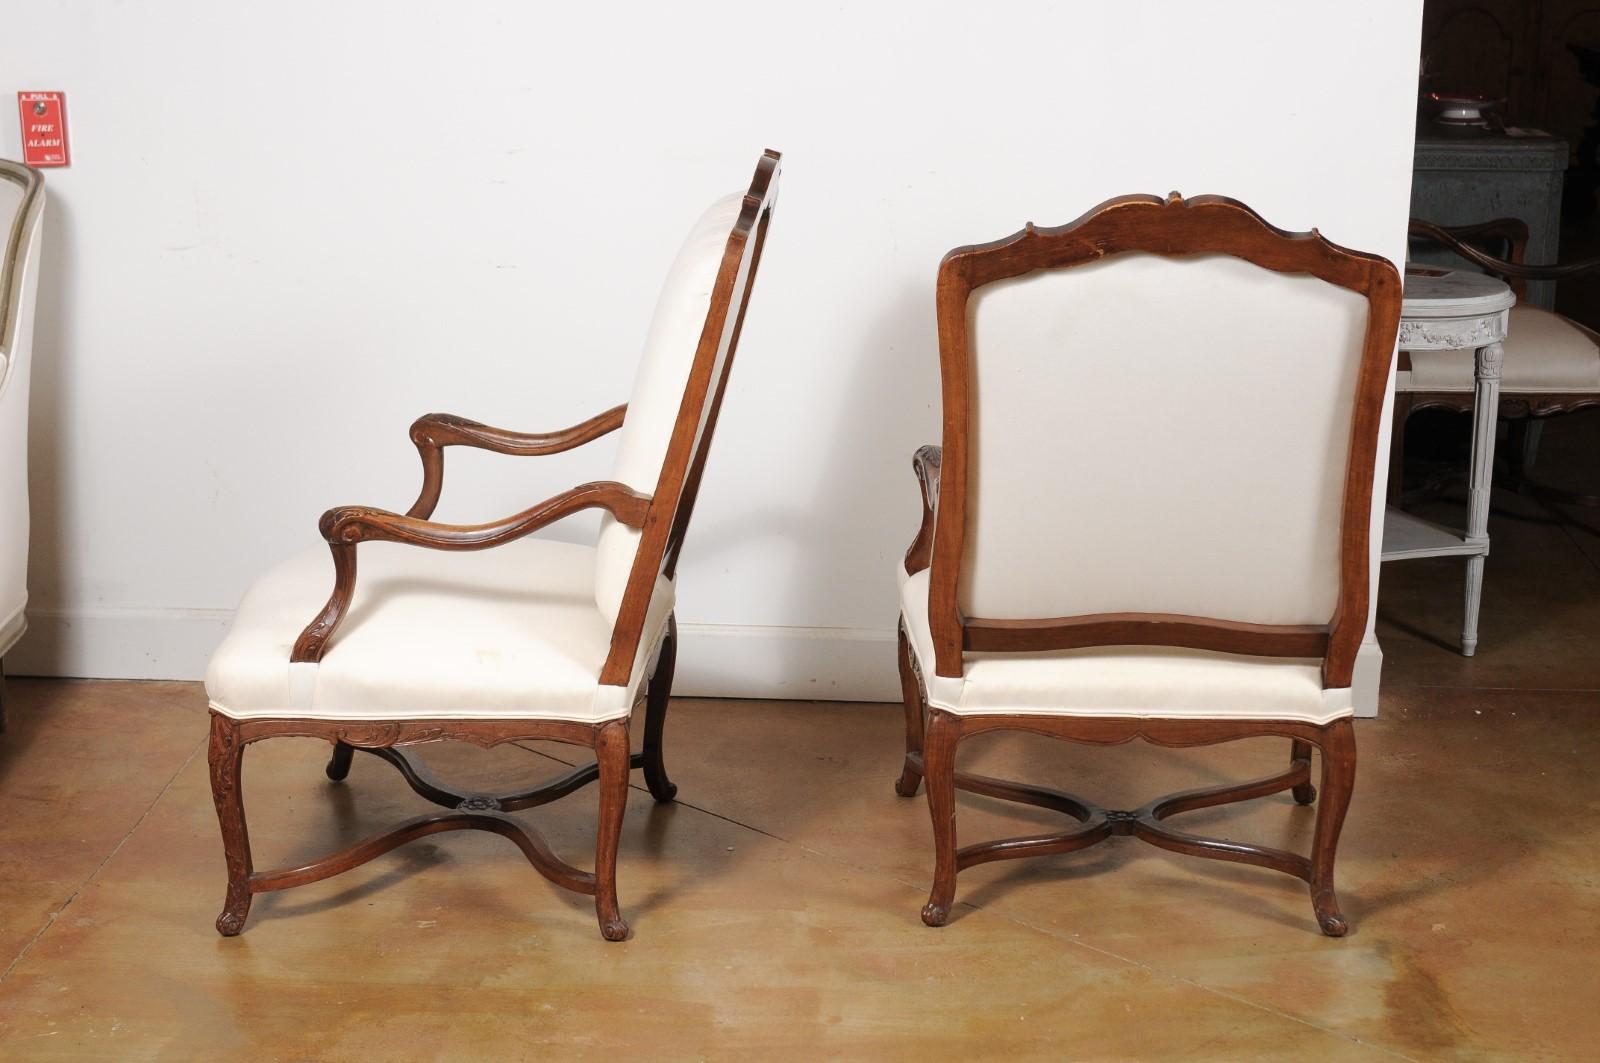 Pair of Early 18th Century French Régence Walnut Armchairs with New Upholstery 1